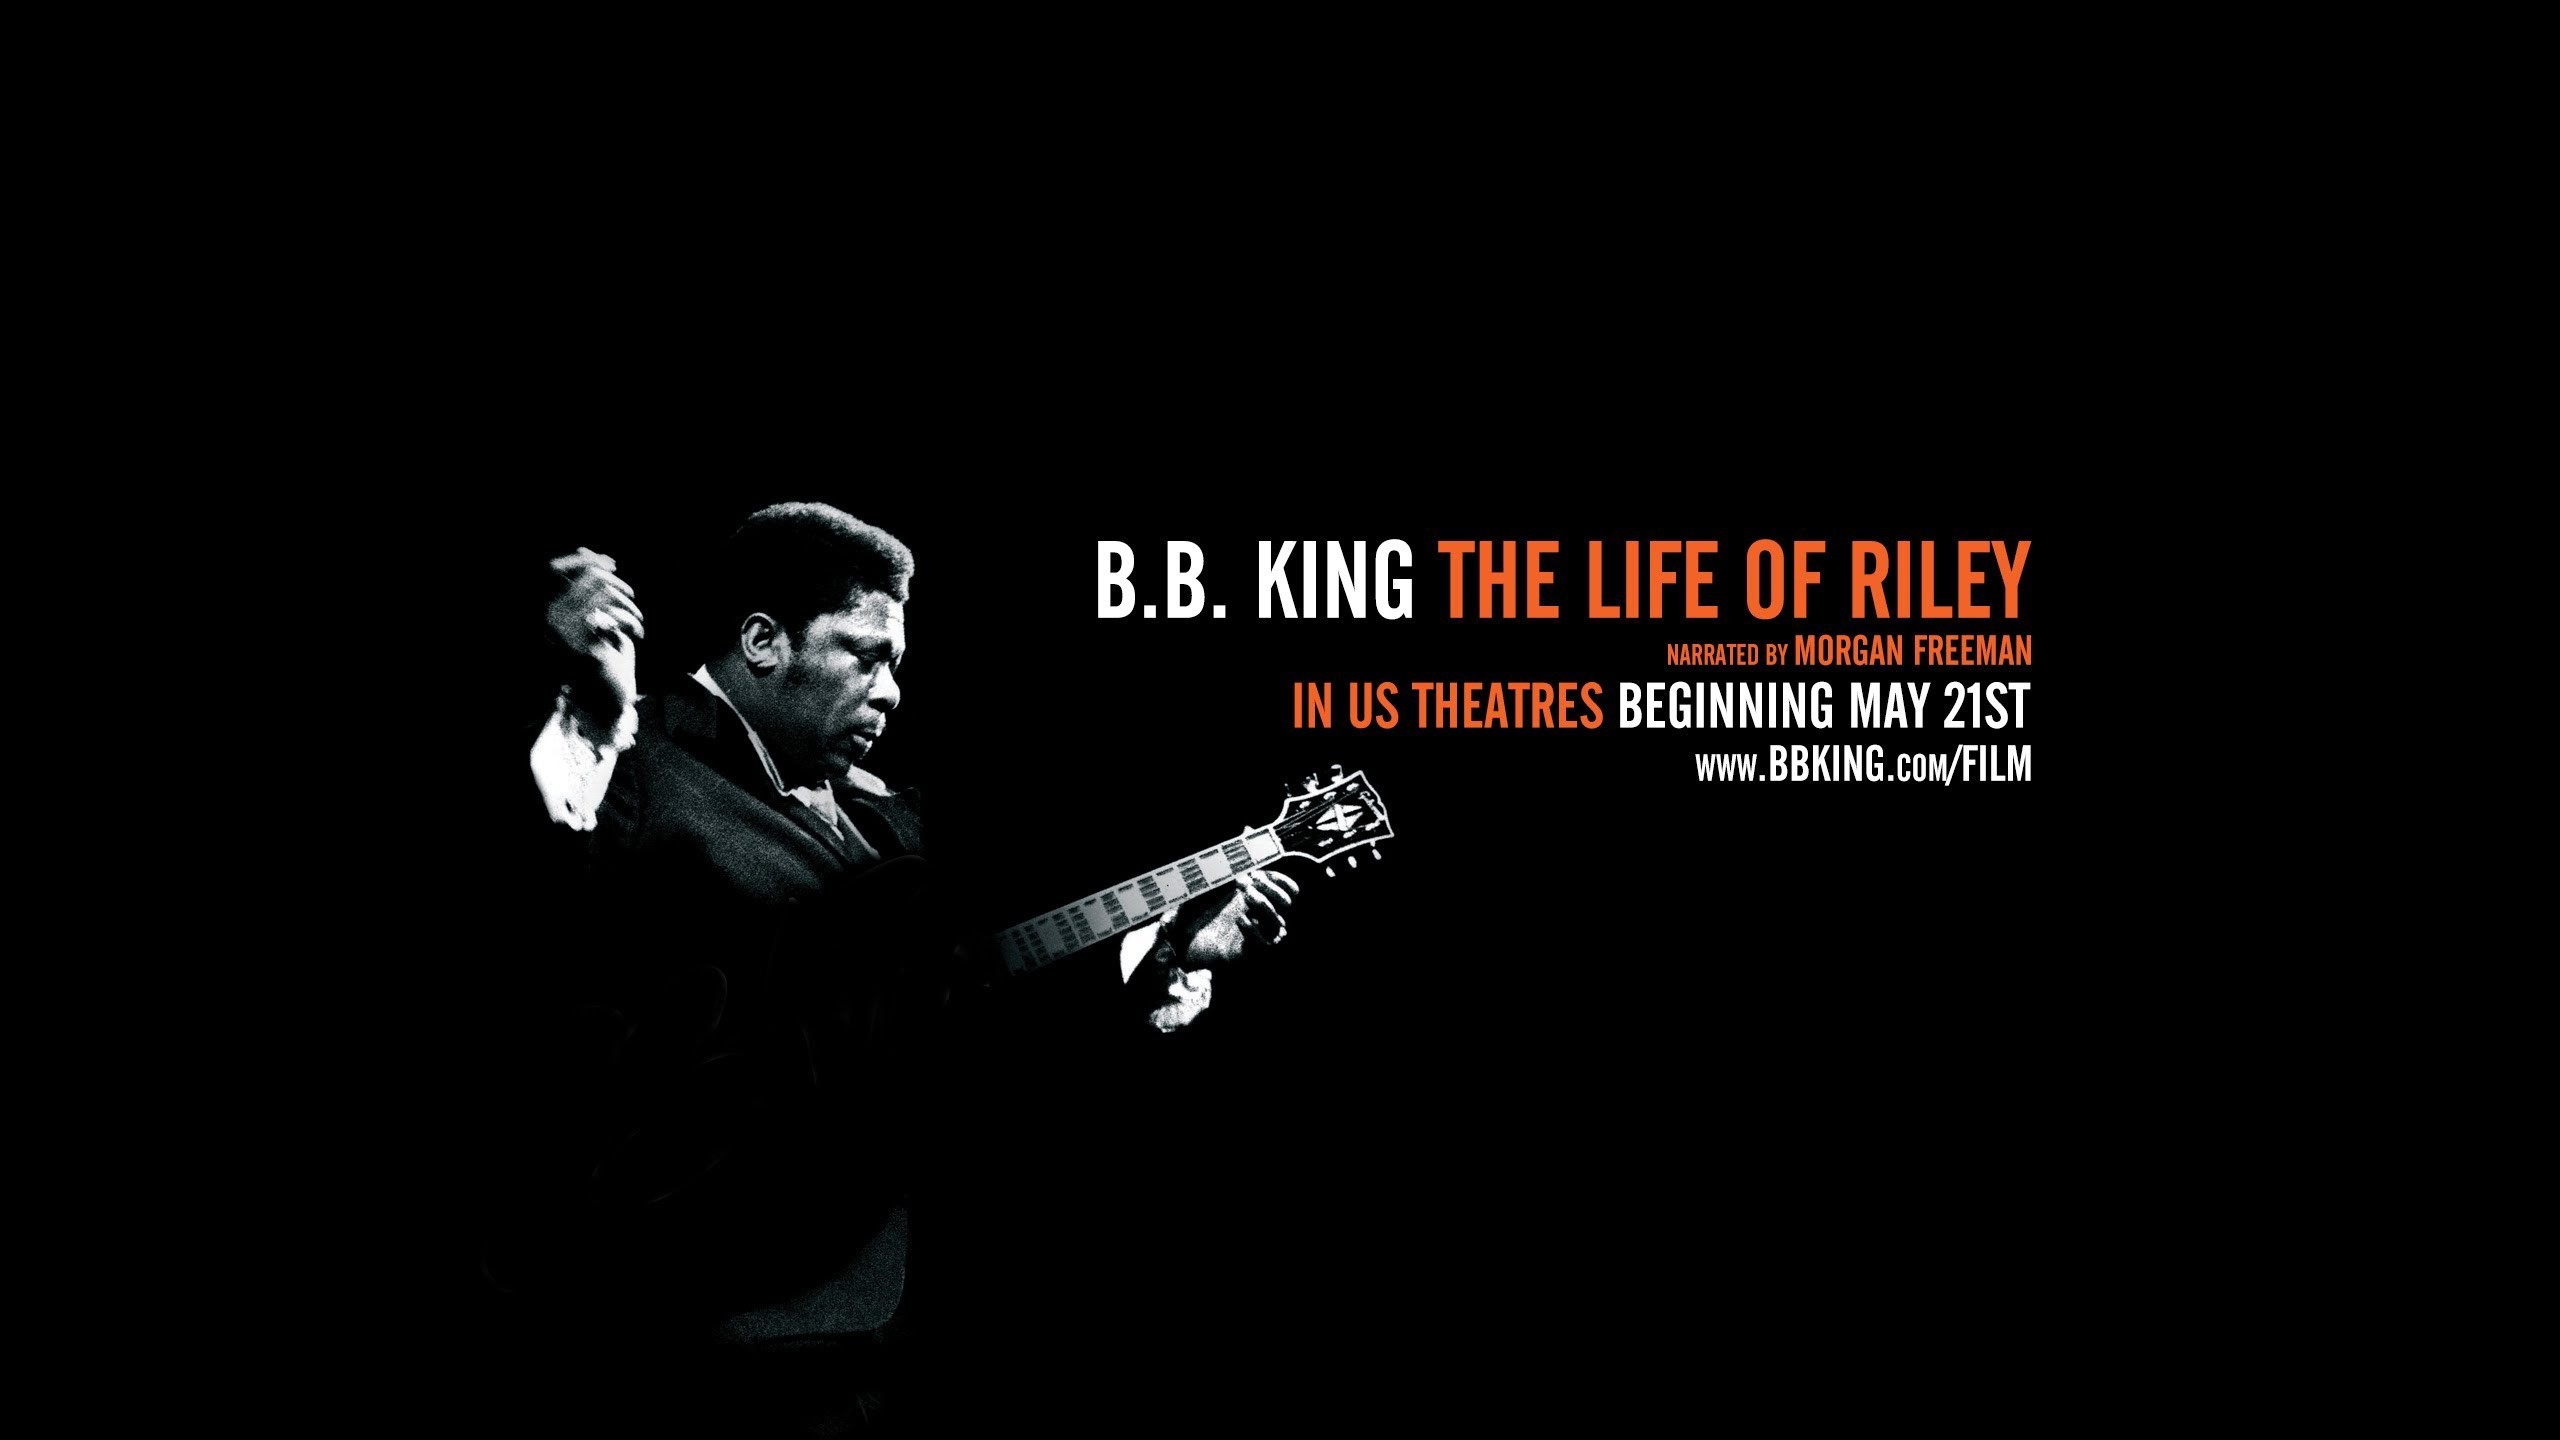 2560x1440 B.B. King: The Life of Riley - Official US Theatrical Trailer [HD] - YouTube